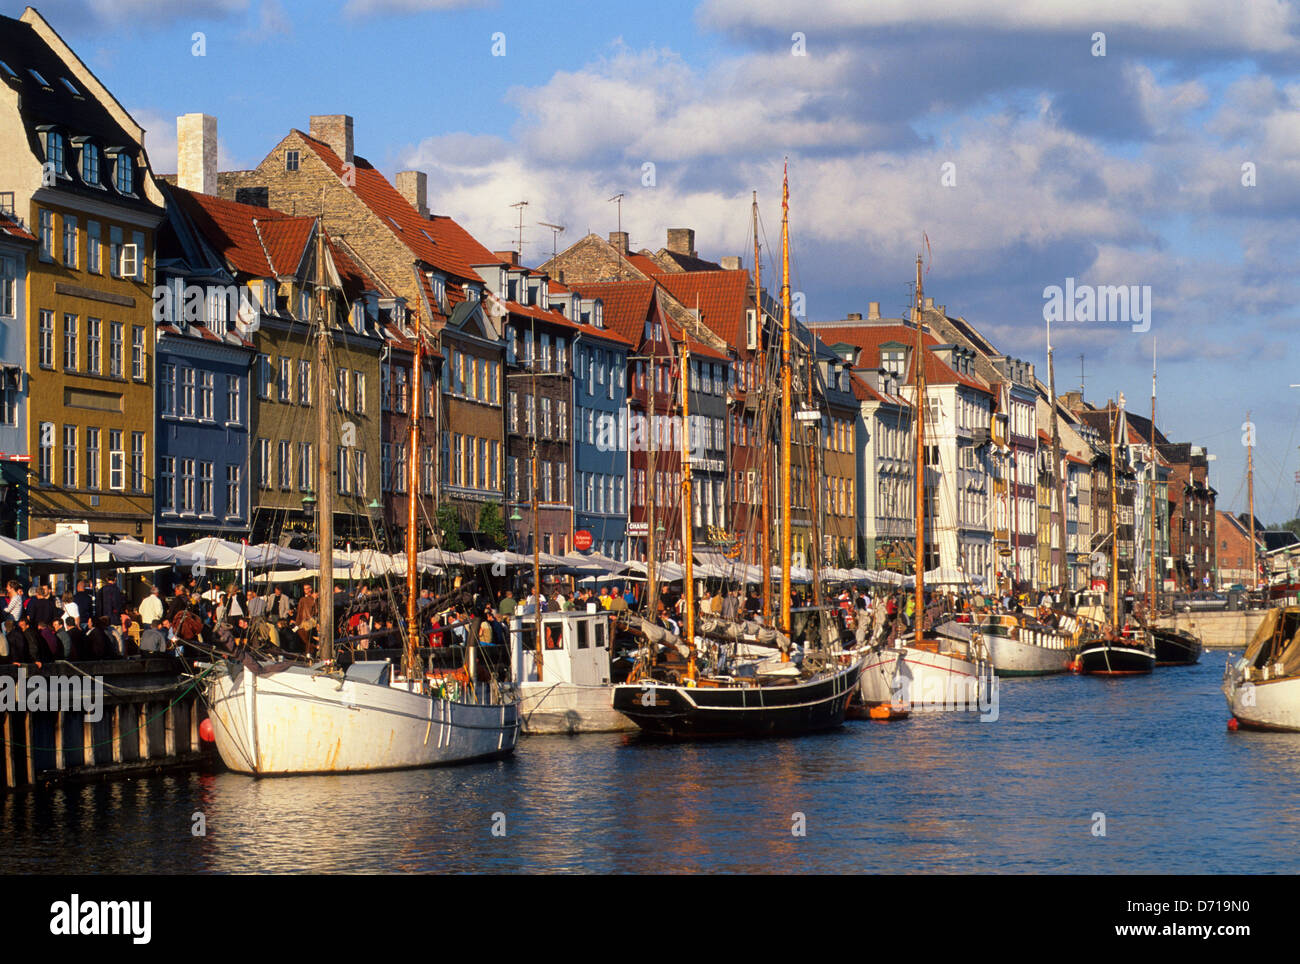 Copenhagen Denmark Street Scenes People High Resolution Stock Photography  and Images - Alamy